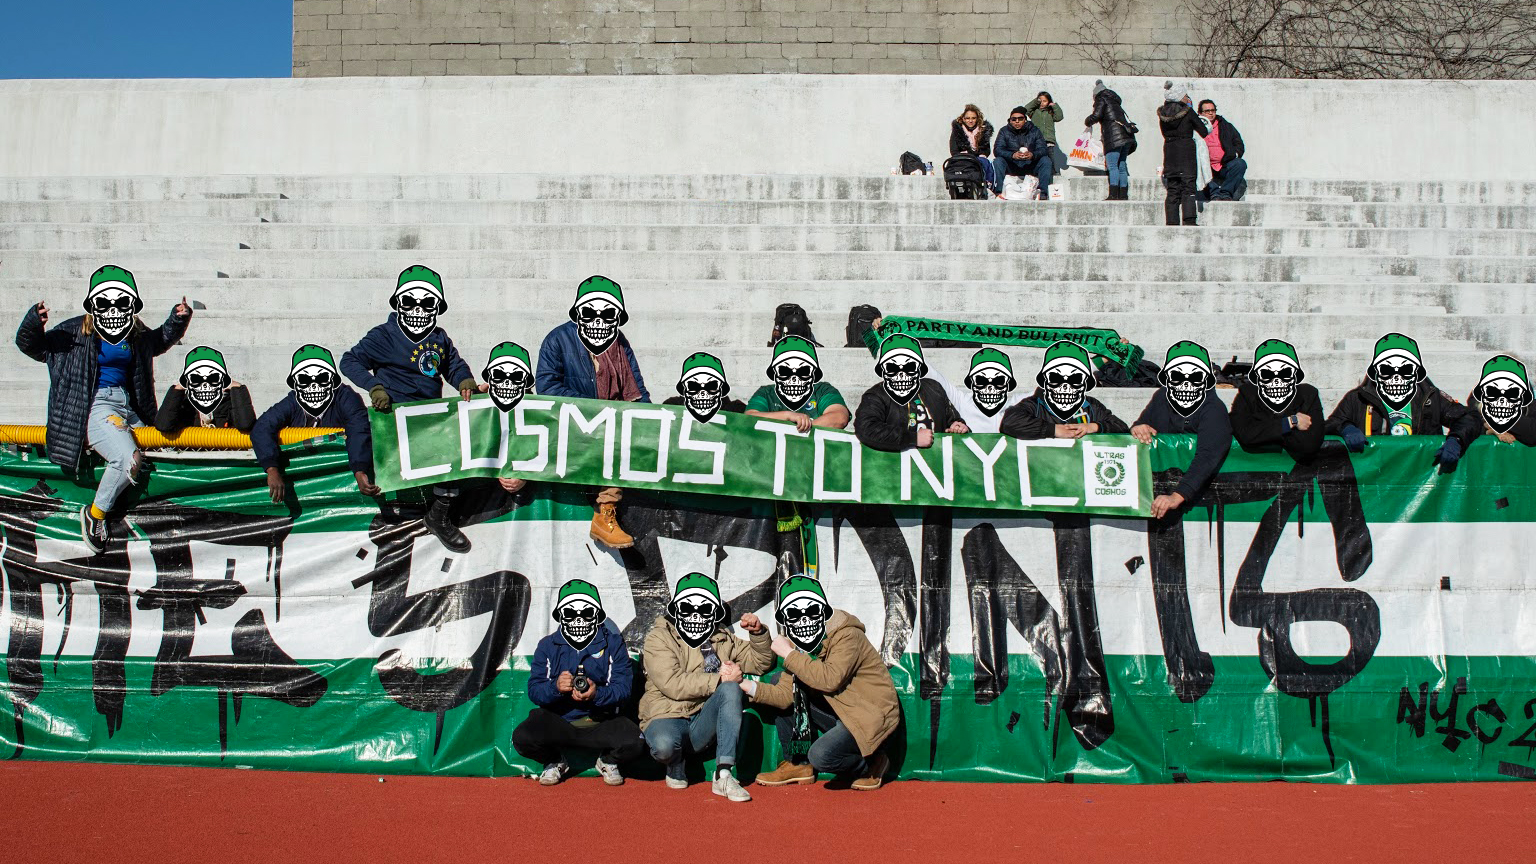 STATEMENT: Cosmos to NYC